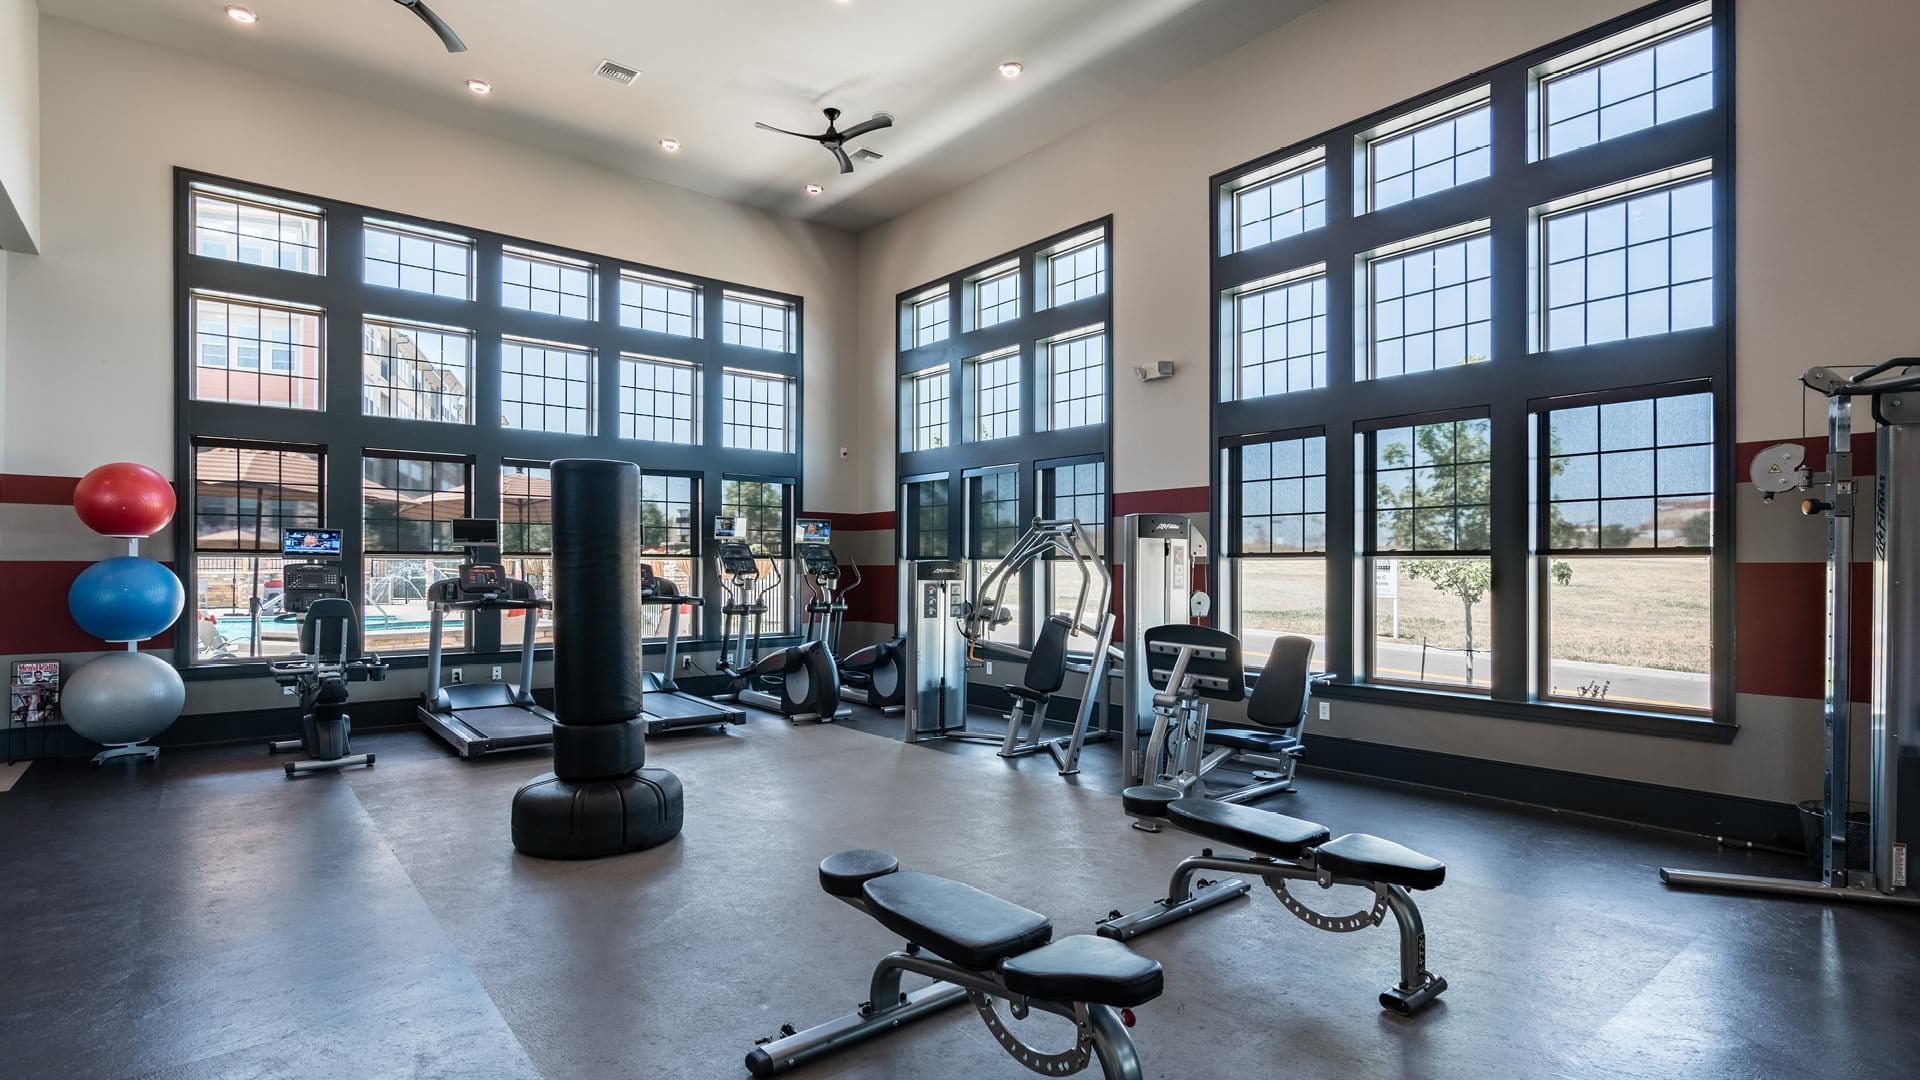 Our Broomfield Apartment Gym With Bright Natural Lighting and Updated Fitness Equipment